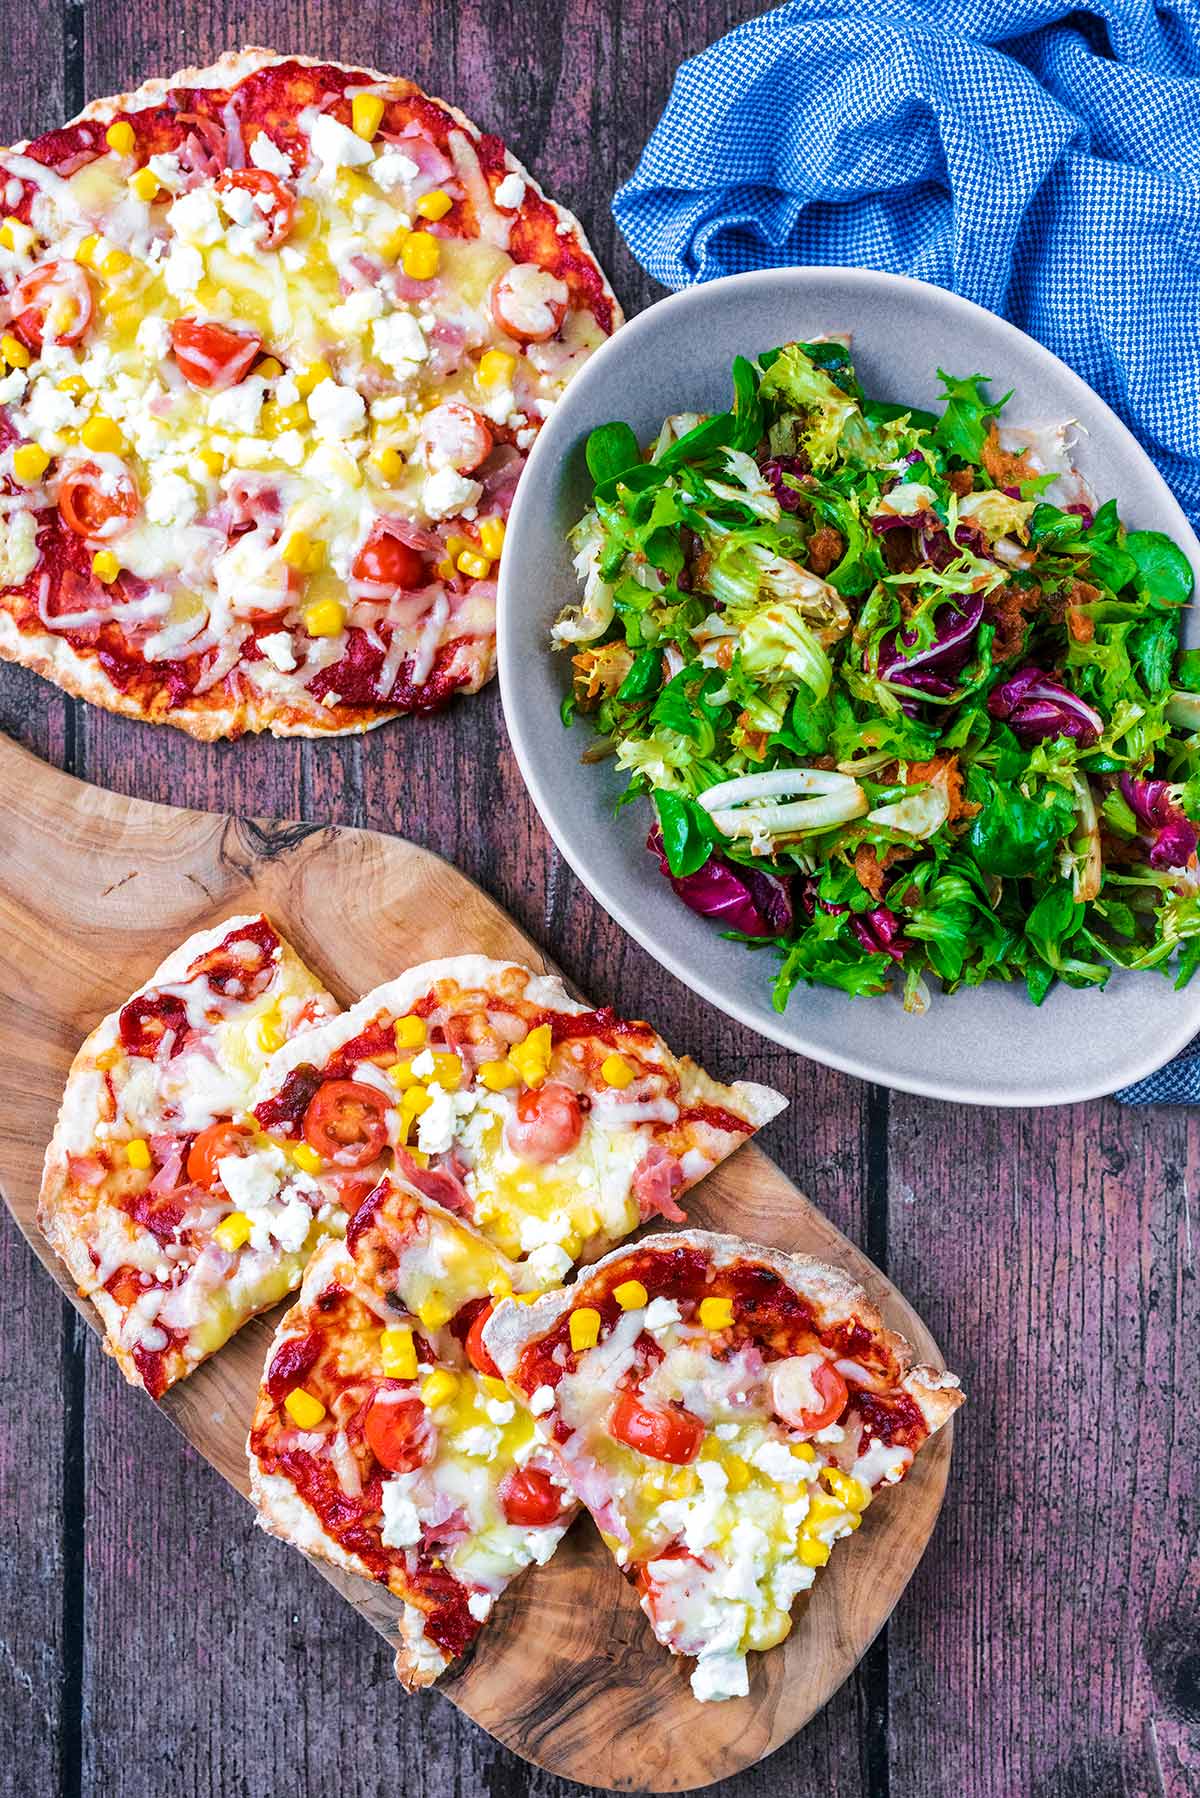 Two pizzas, one cut into slices, next to a bowl of salad.